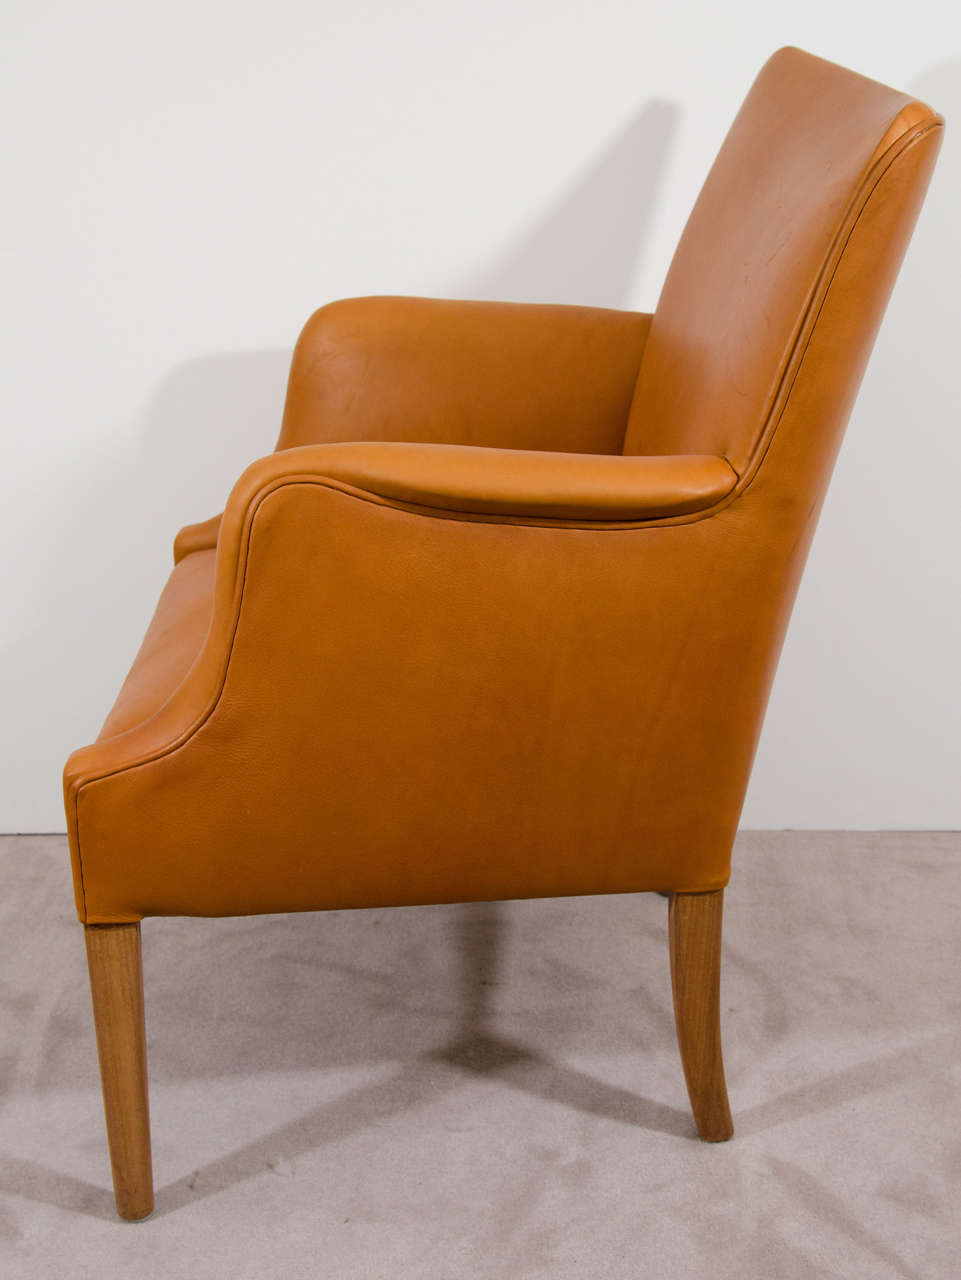 20th Century Danish Modern Easy Chair in Leather